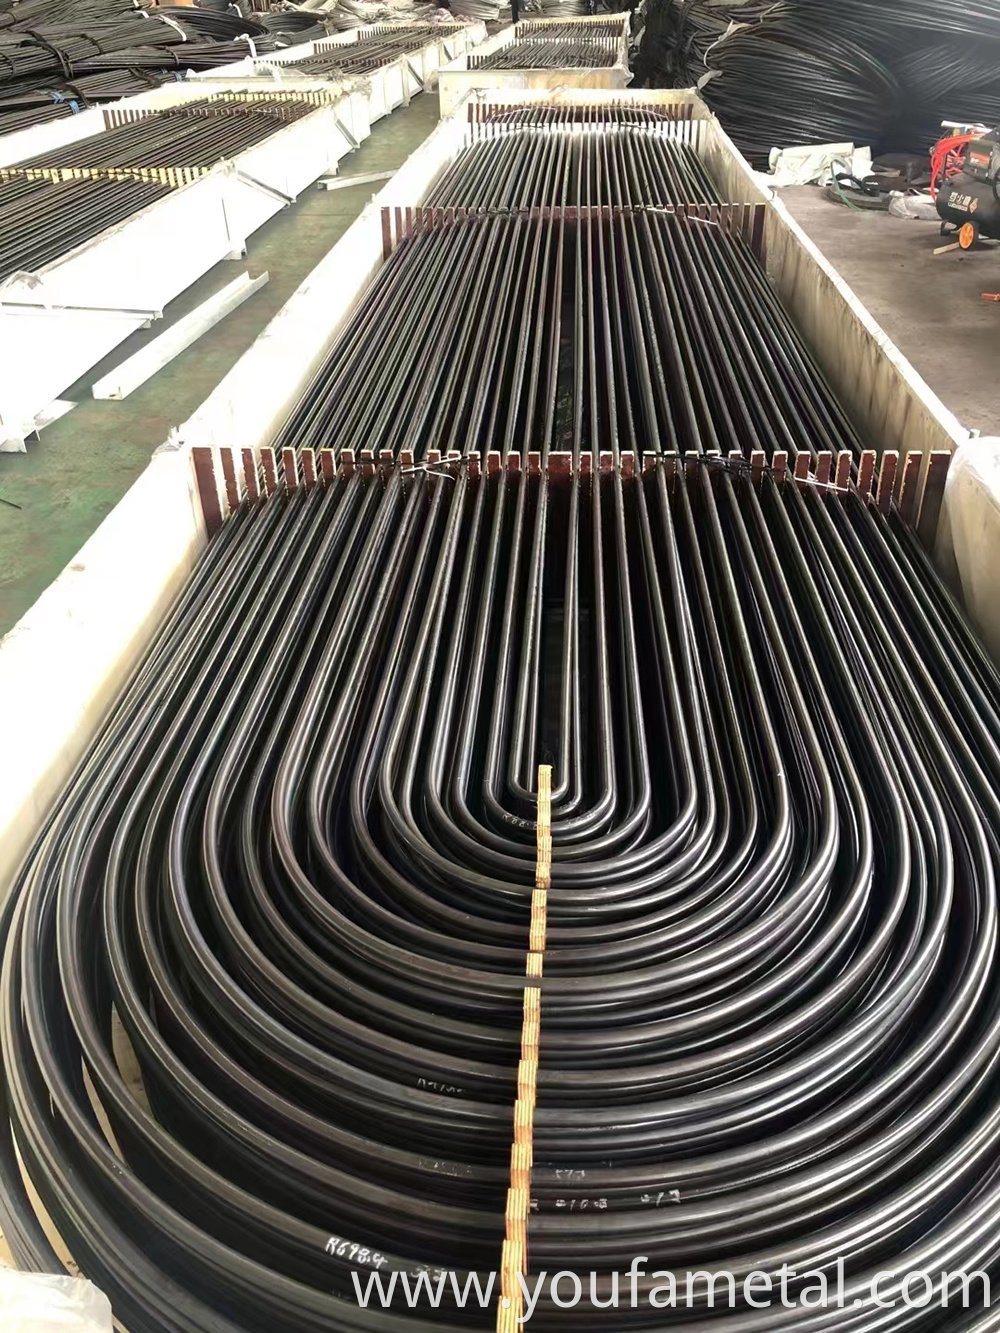 u-bend-astm-a556-feedwater-heater-tubes